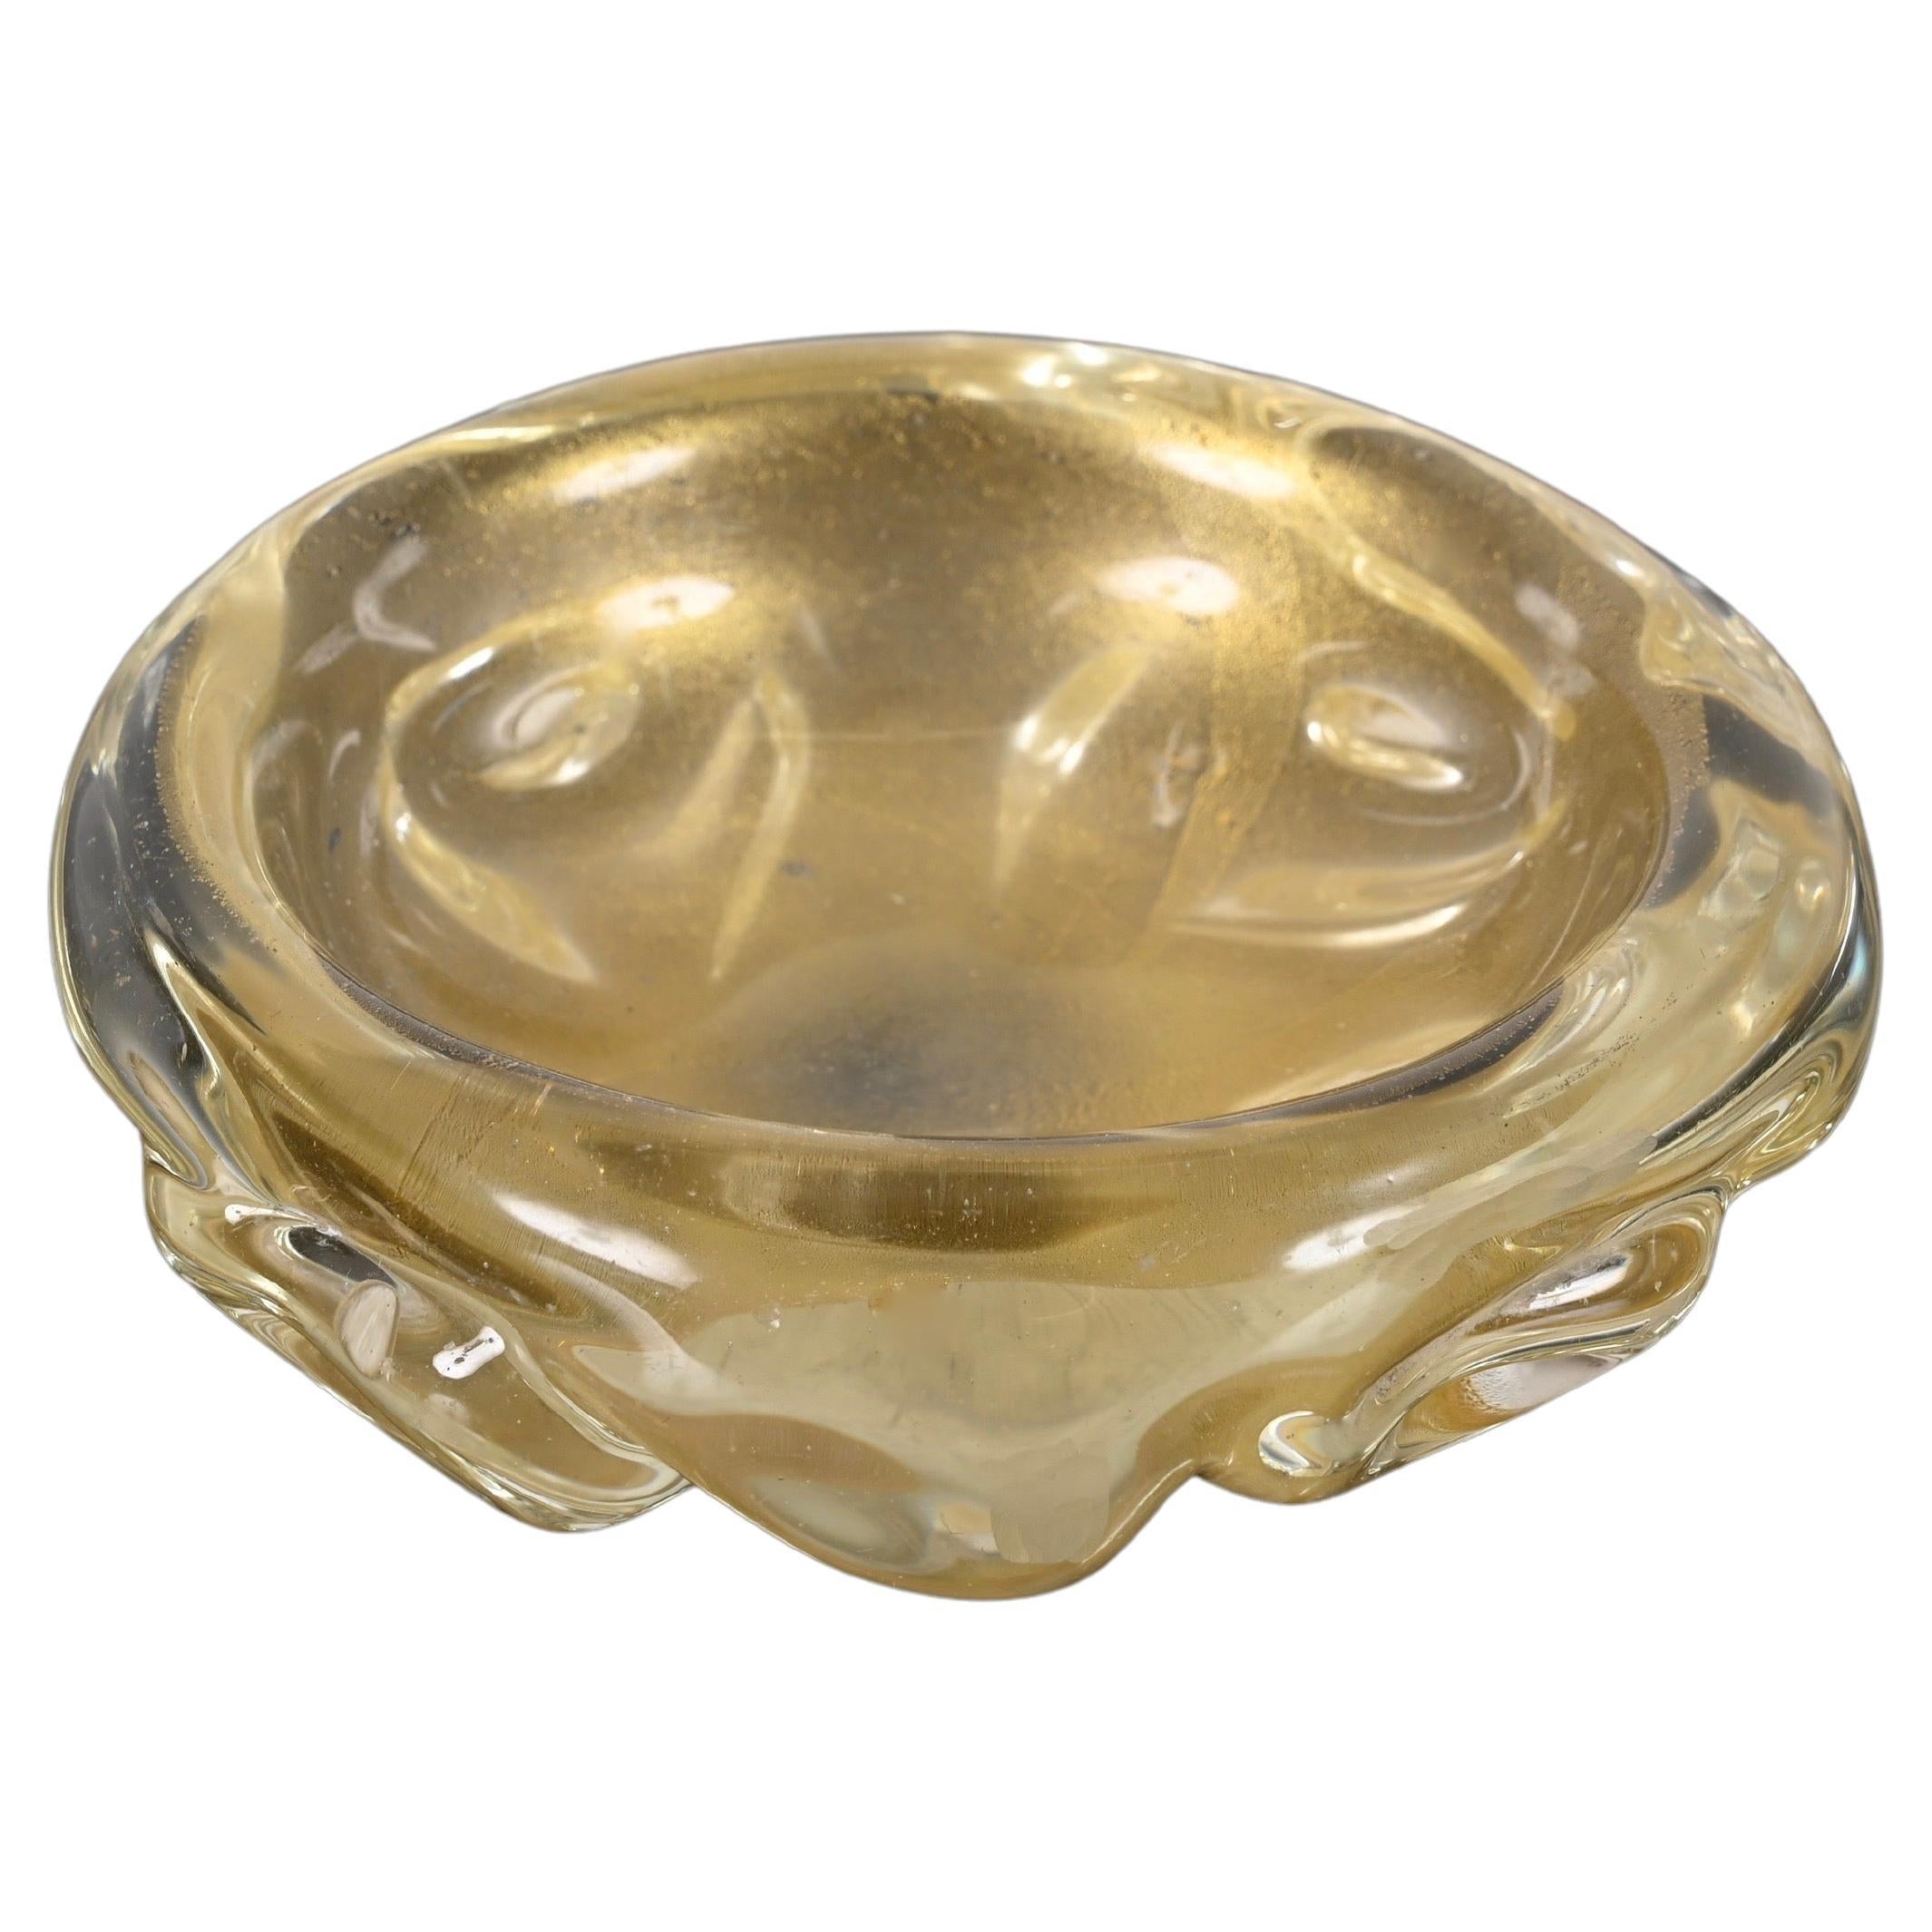 Archimede Seguso Midcentury Murano Glass Bowl with Gold Dots, Italy, 1960s